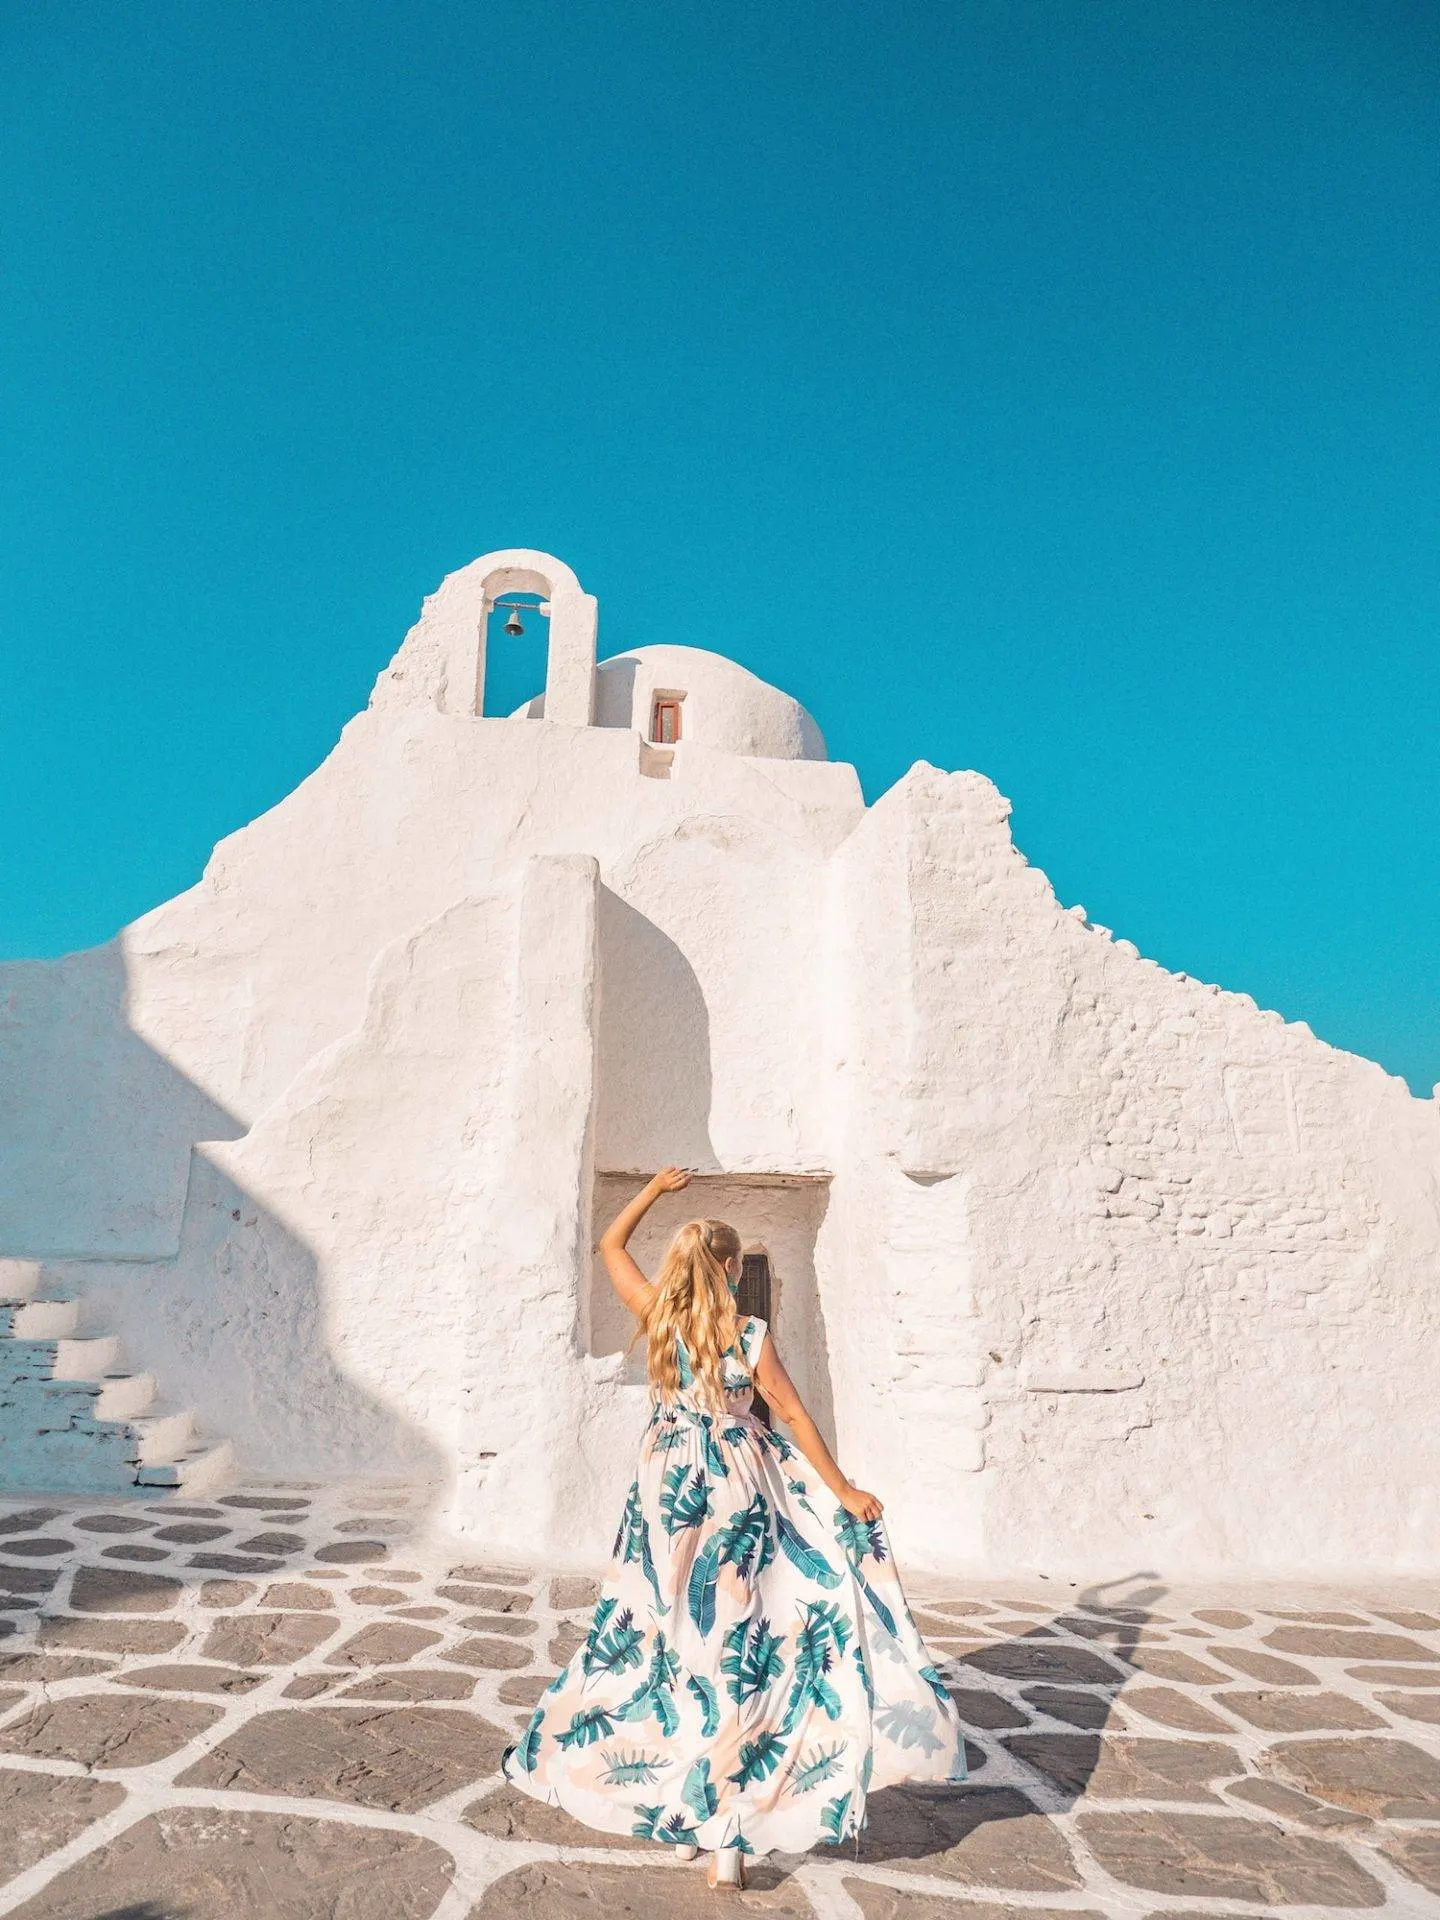 The Paraportiani Church is one of the most instagrammable places in Mykonos. Click the photo to see the rest of my list of the most instagrammable places in Mykonos! 